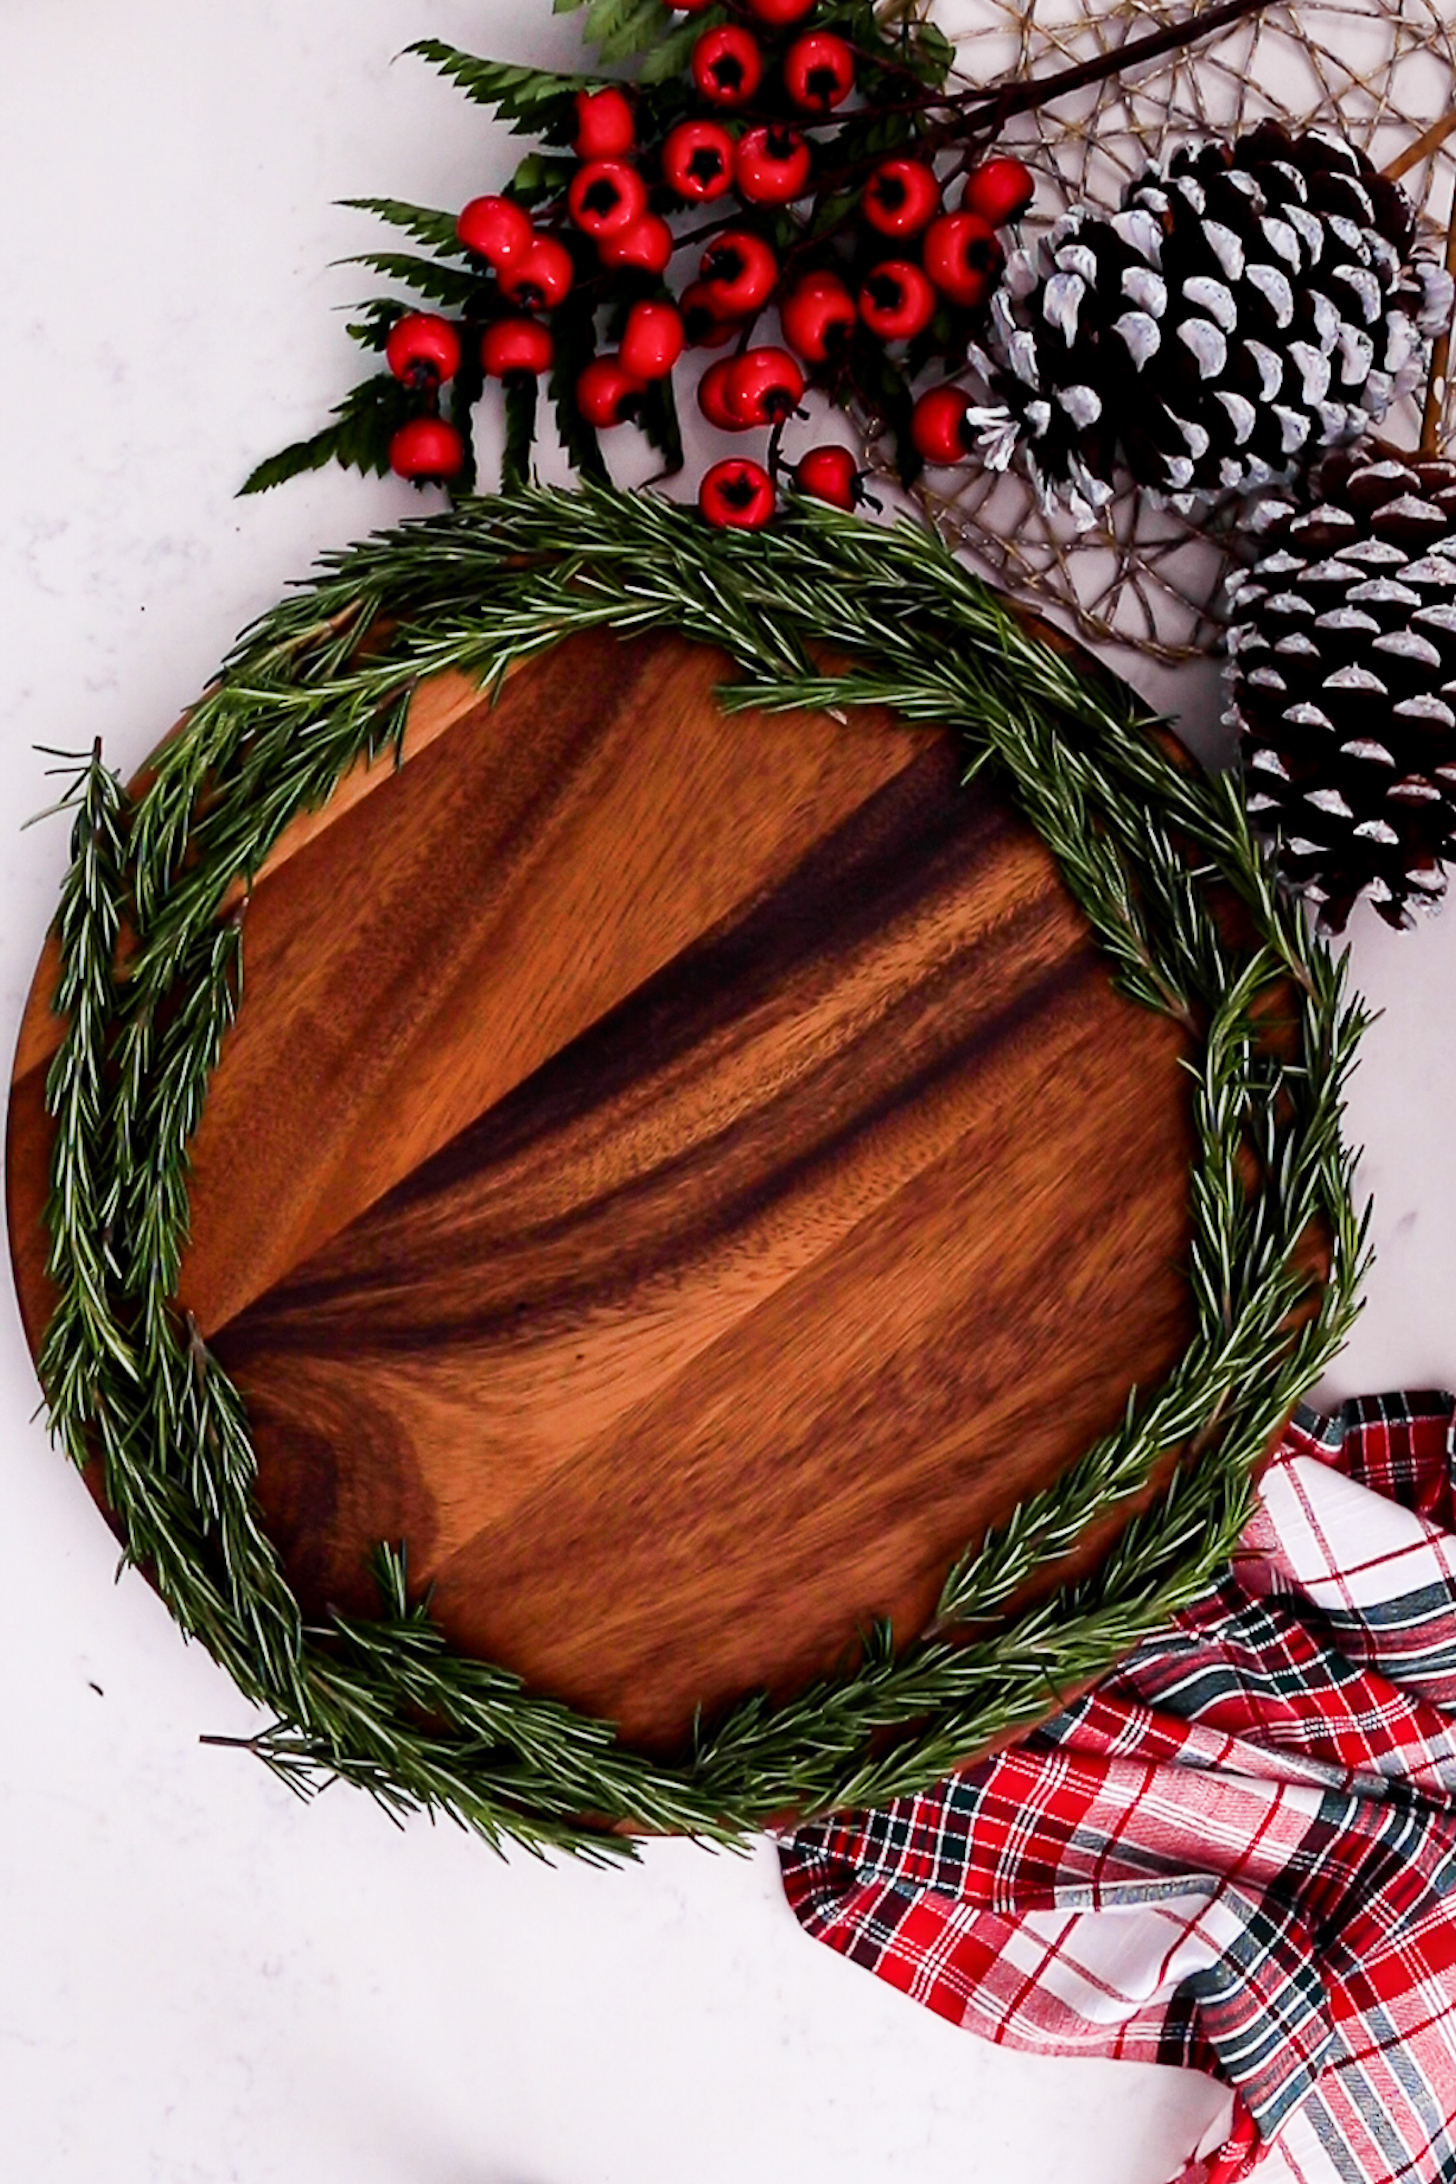 A lazy Susan holds fresh rosemary around its edge, while festive decorations surround it.